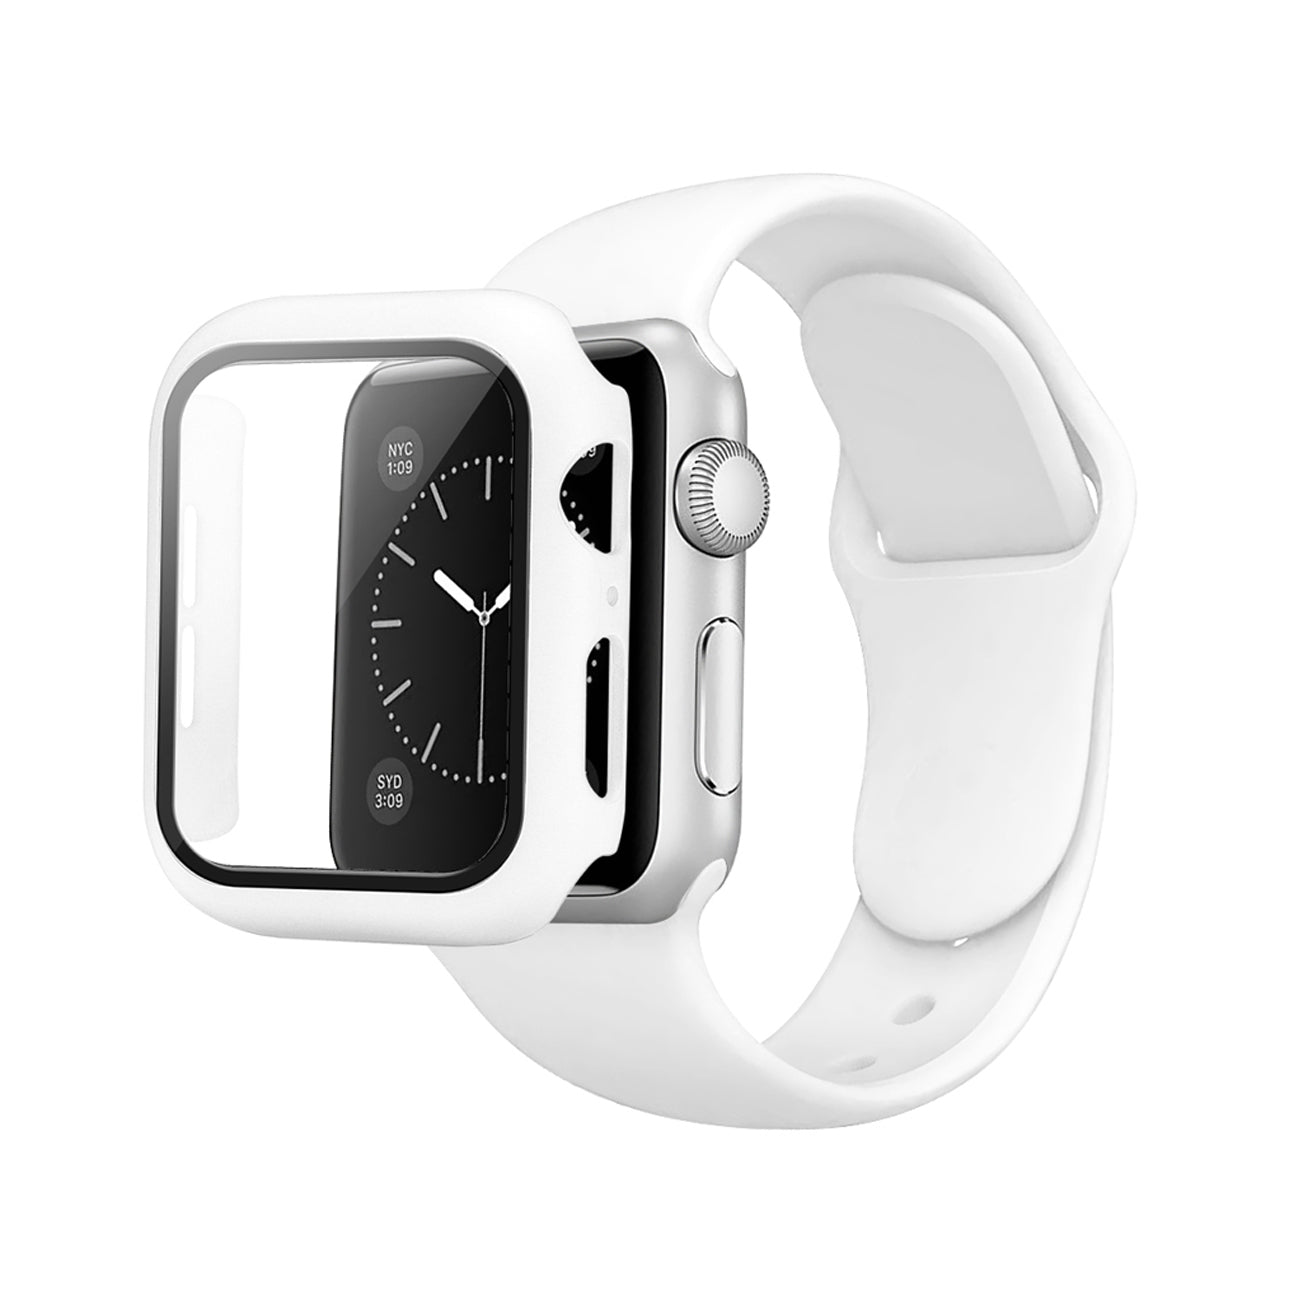 Watch Case PC With Glass Screen Protector, Silicone Watch Band Apple Watch 42mm White Color